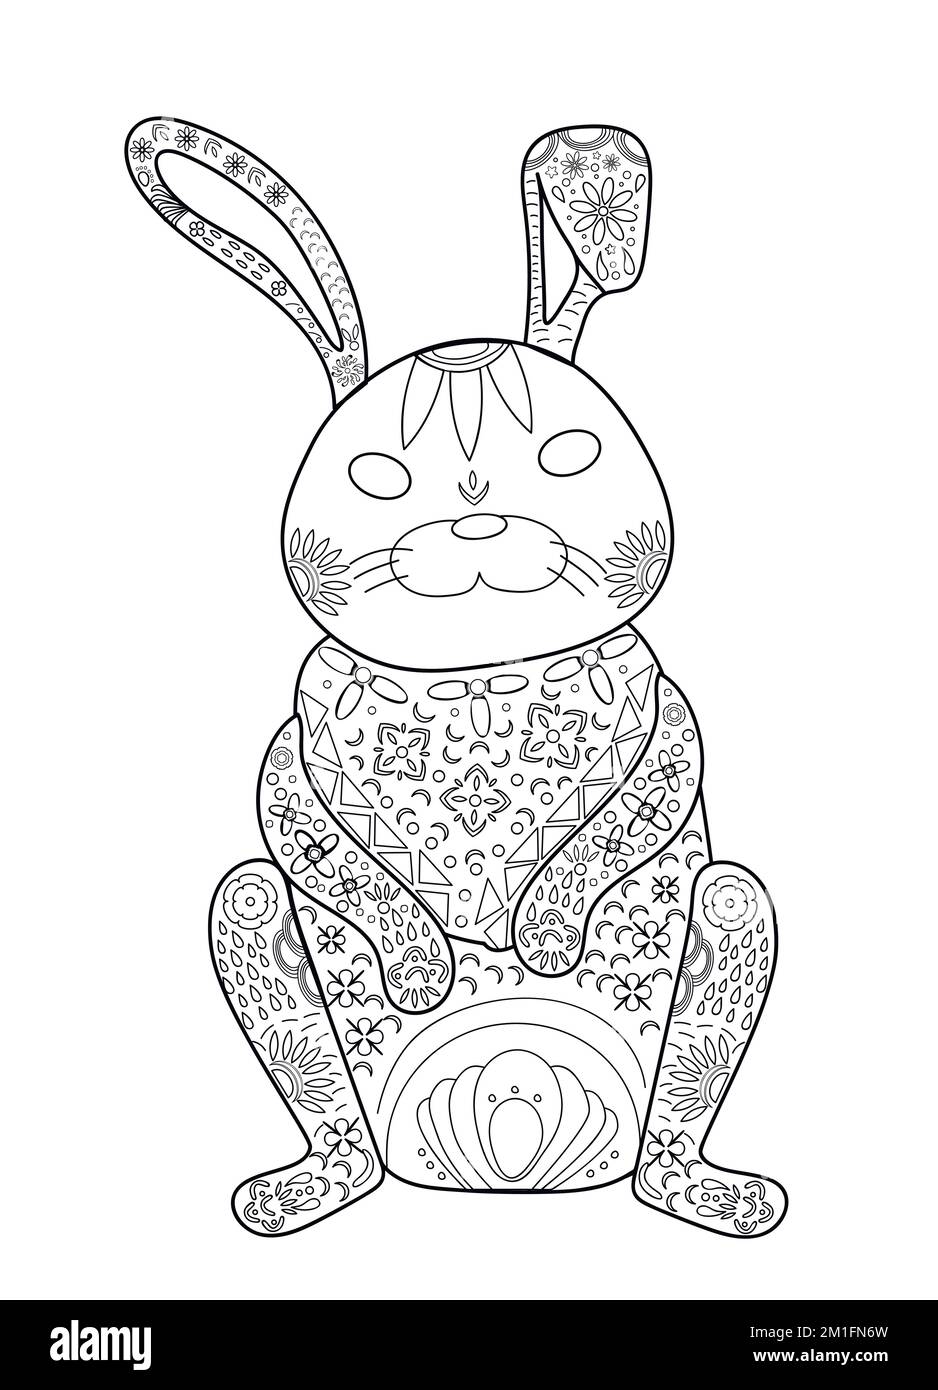 Illustration of rabbit coloring page Stock Vector